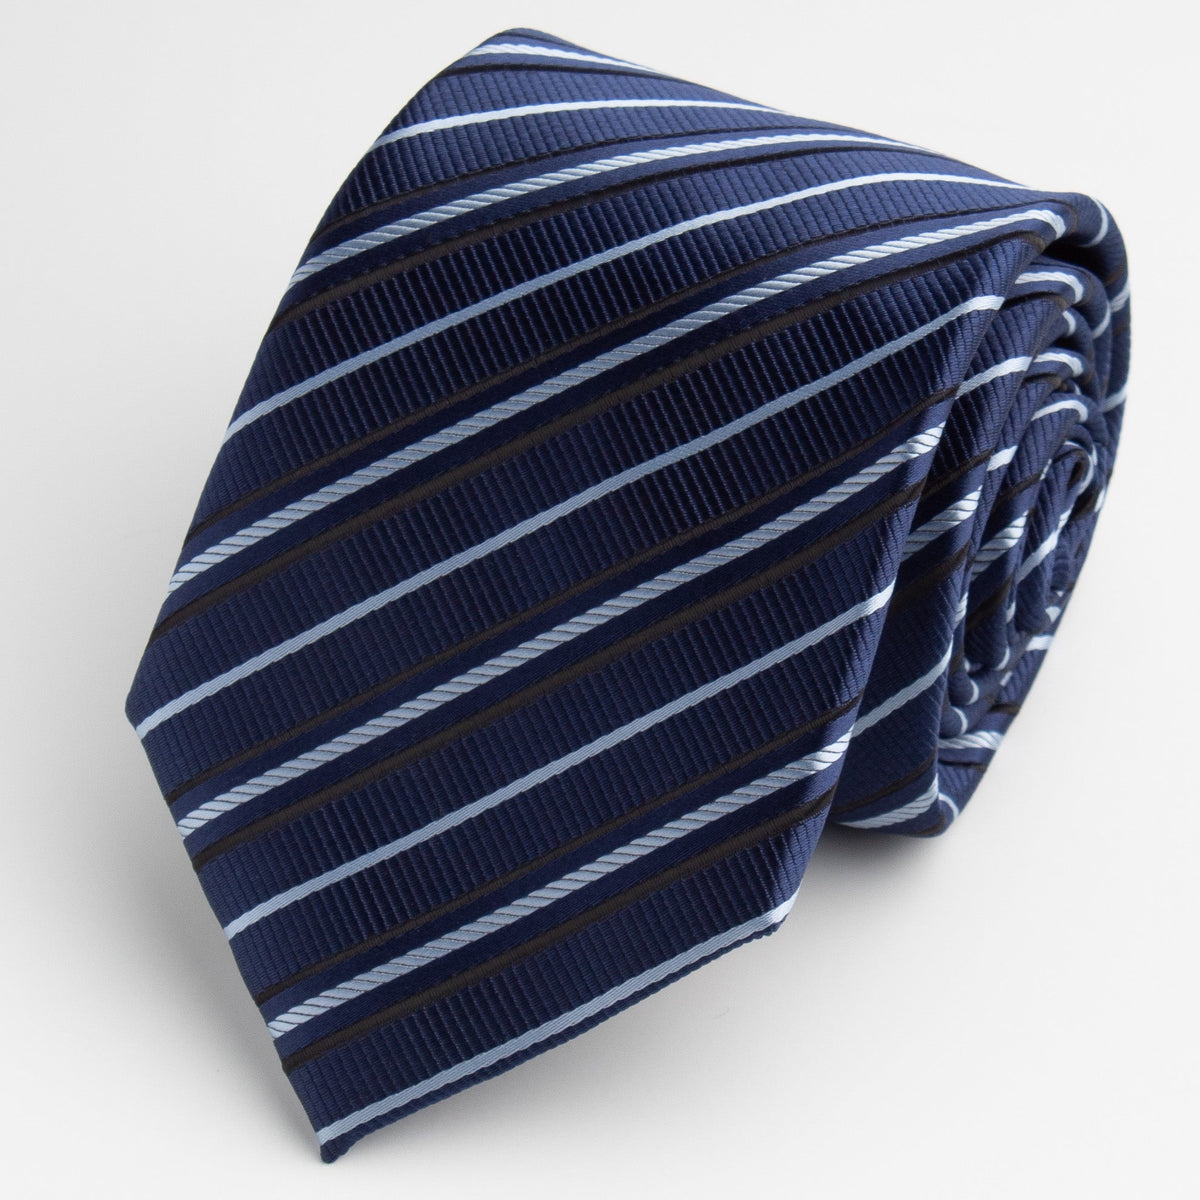 Anchors Away Traditional Tie